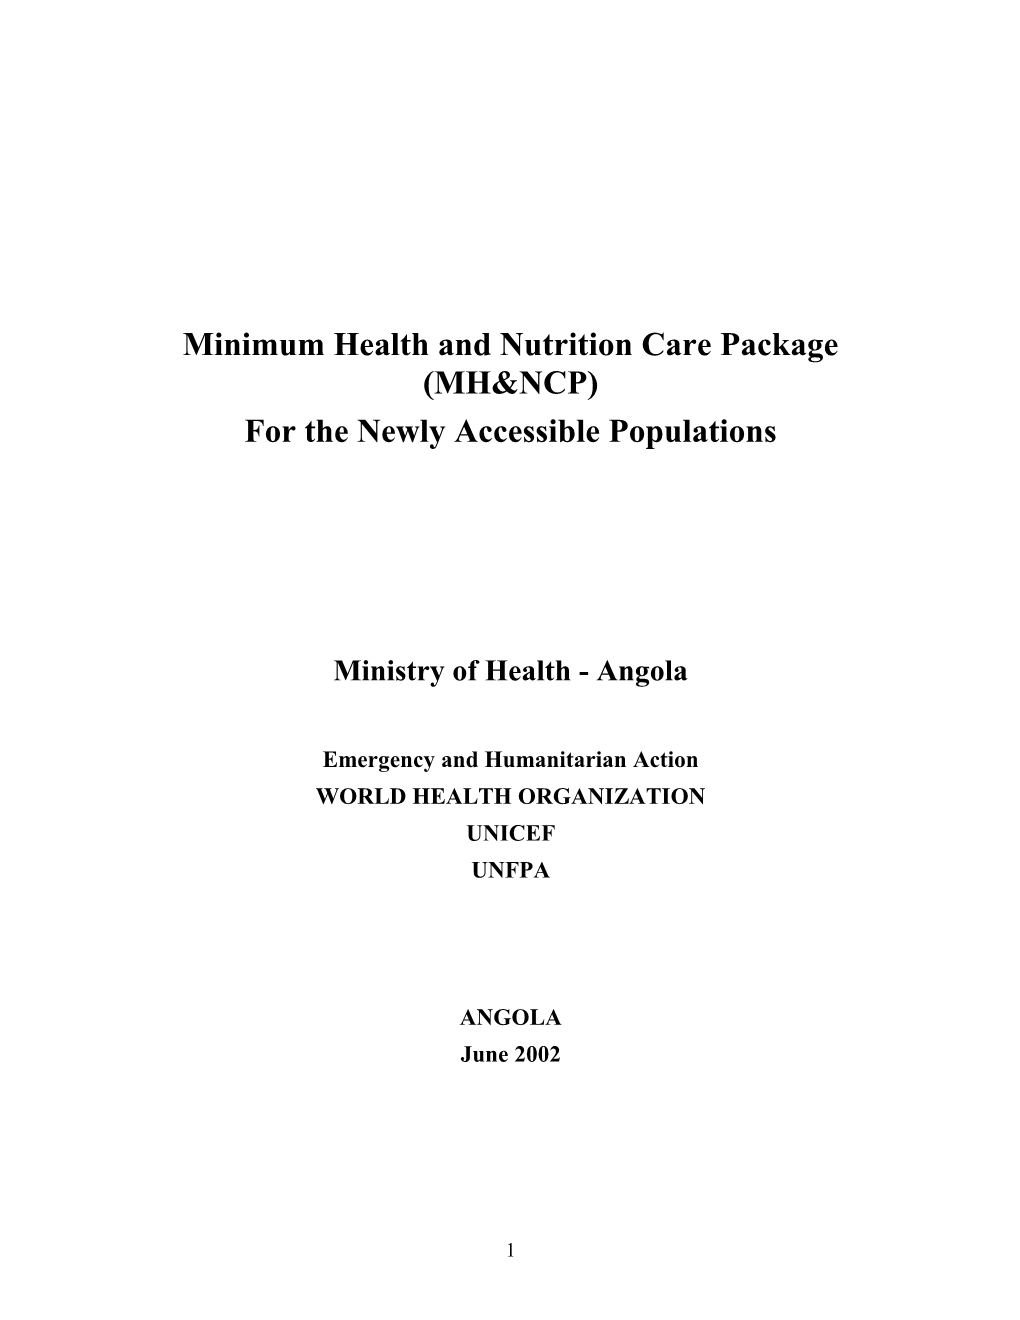 Minimum Health and Nutrition Care Package for the Newly Accesible Populations